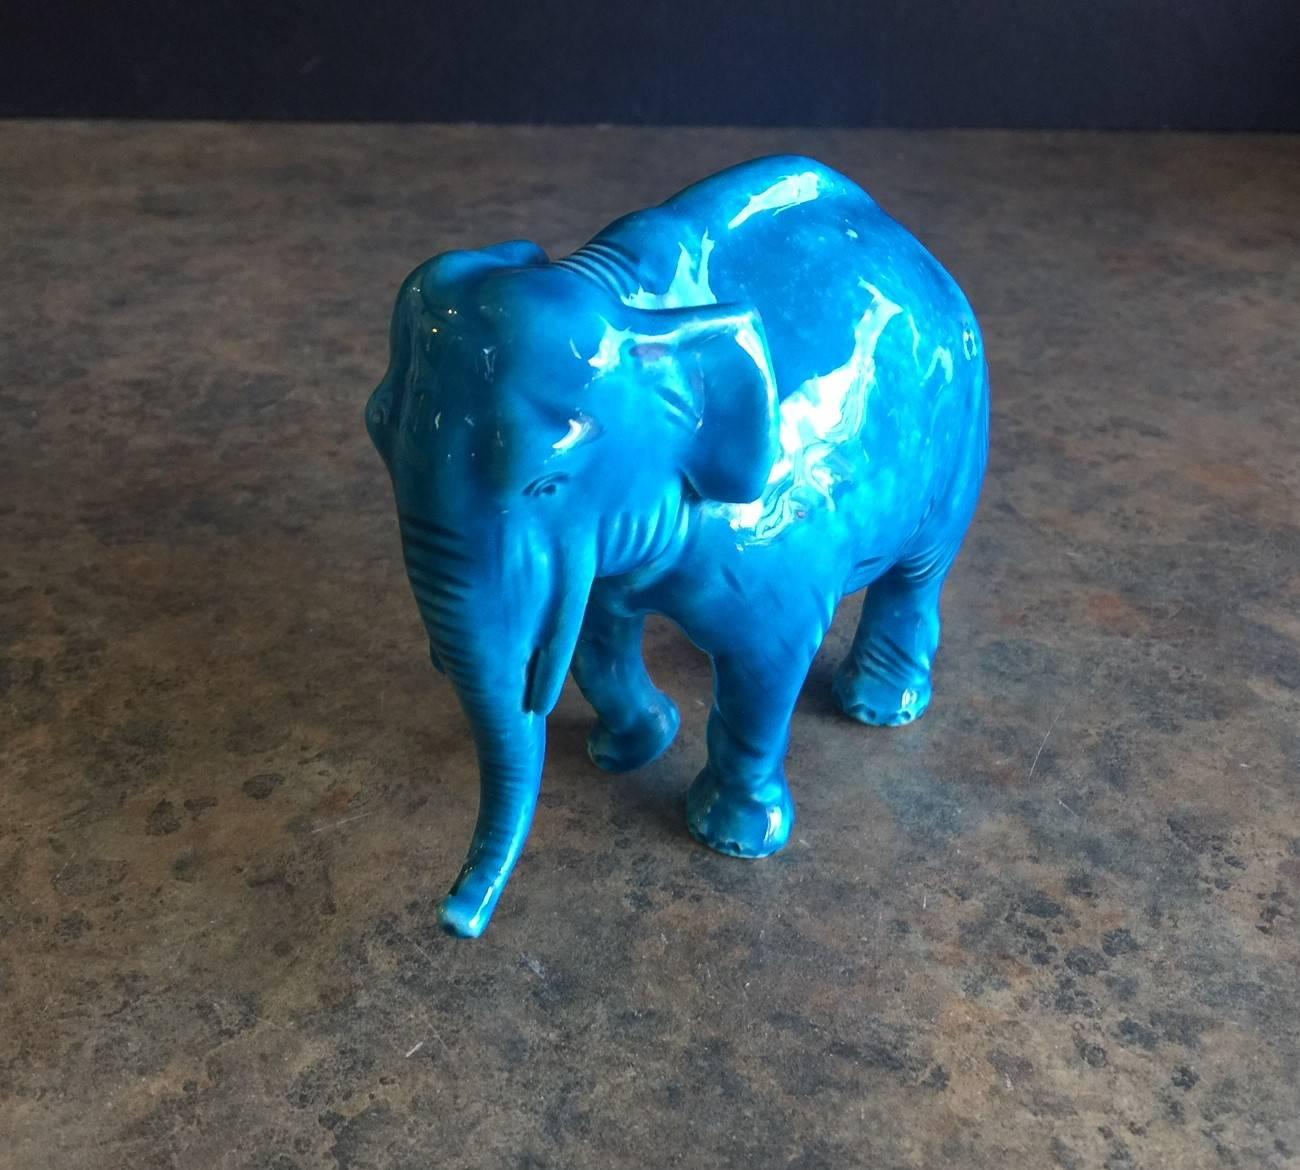 A very cool small, blue ceramic elephant by Sevres of France, circa 1960s. The piece is in excellent condition with no chips or cracks.